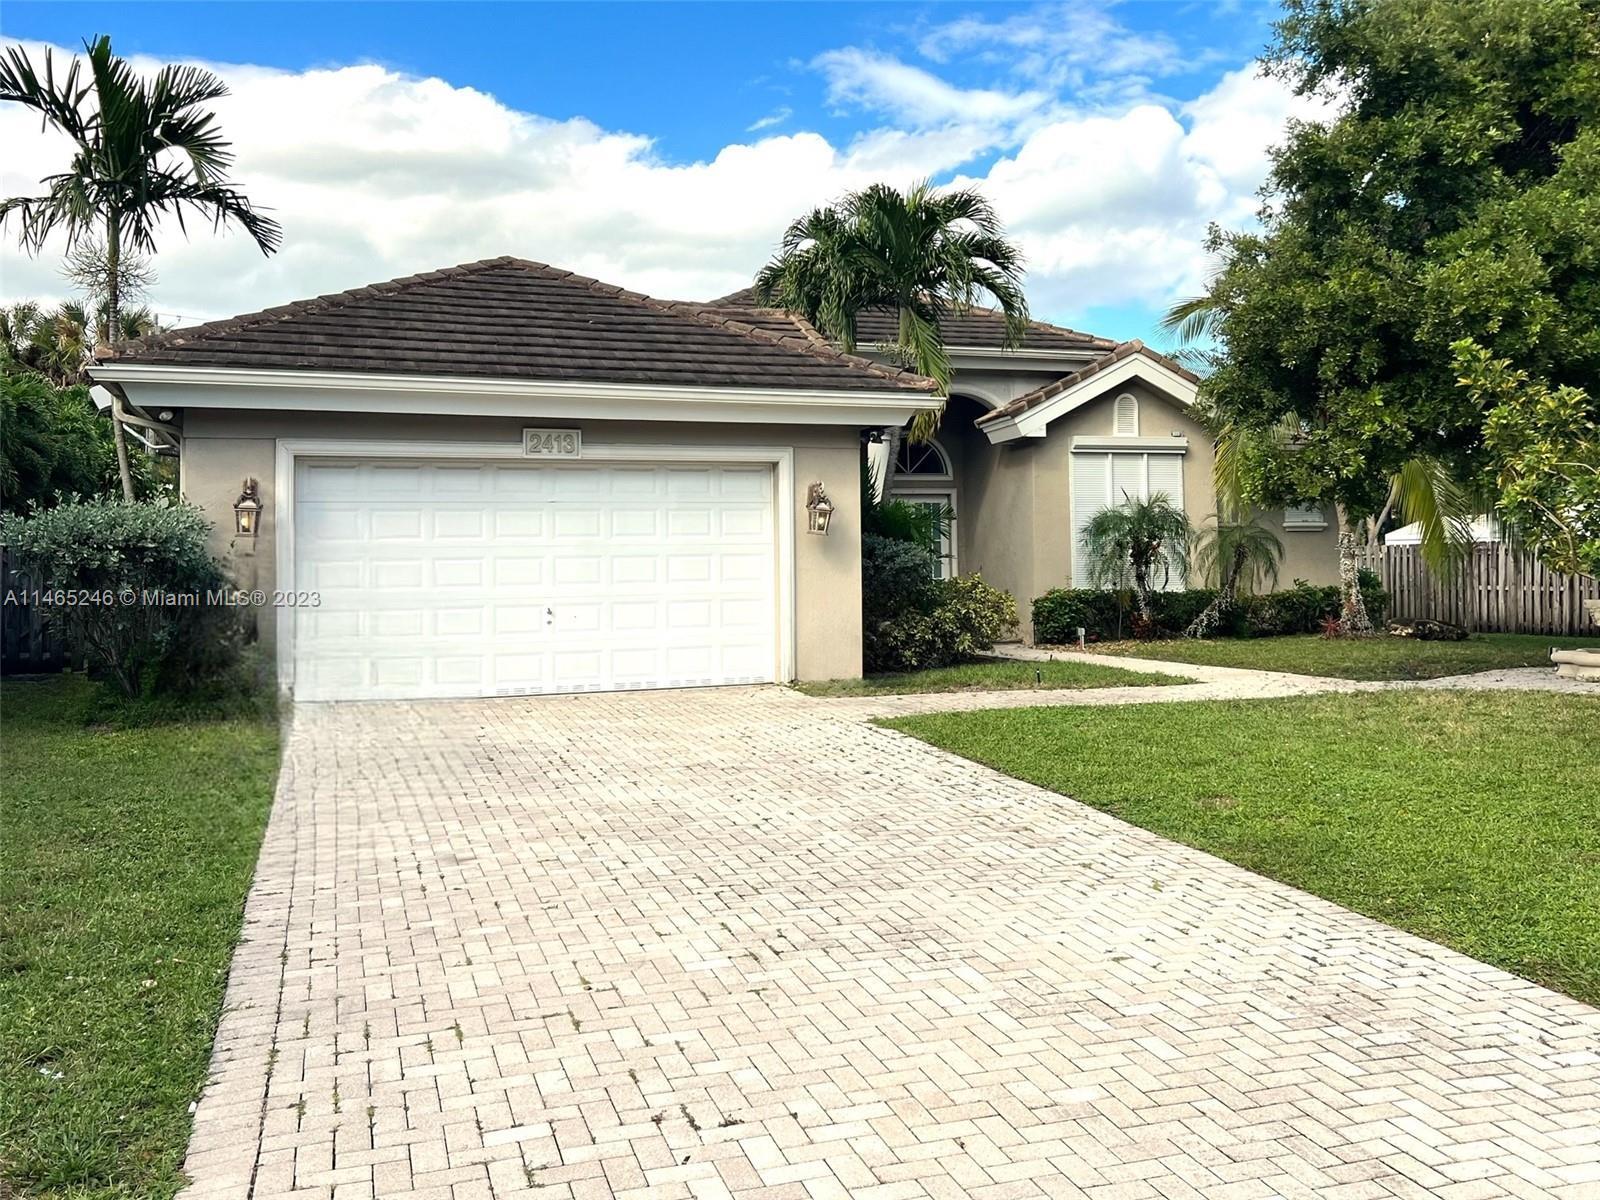 Photo of 2413 NE 13th St in Fort Lauderdale, FL